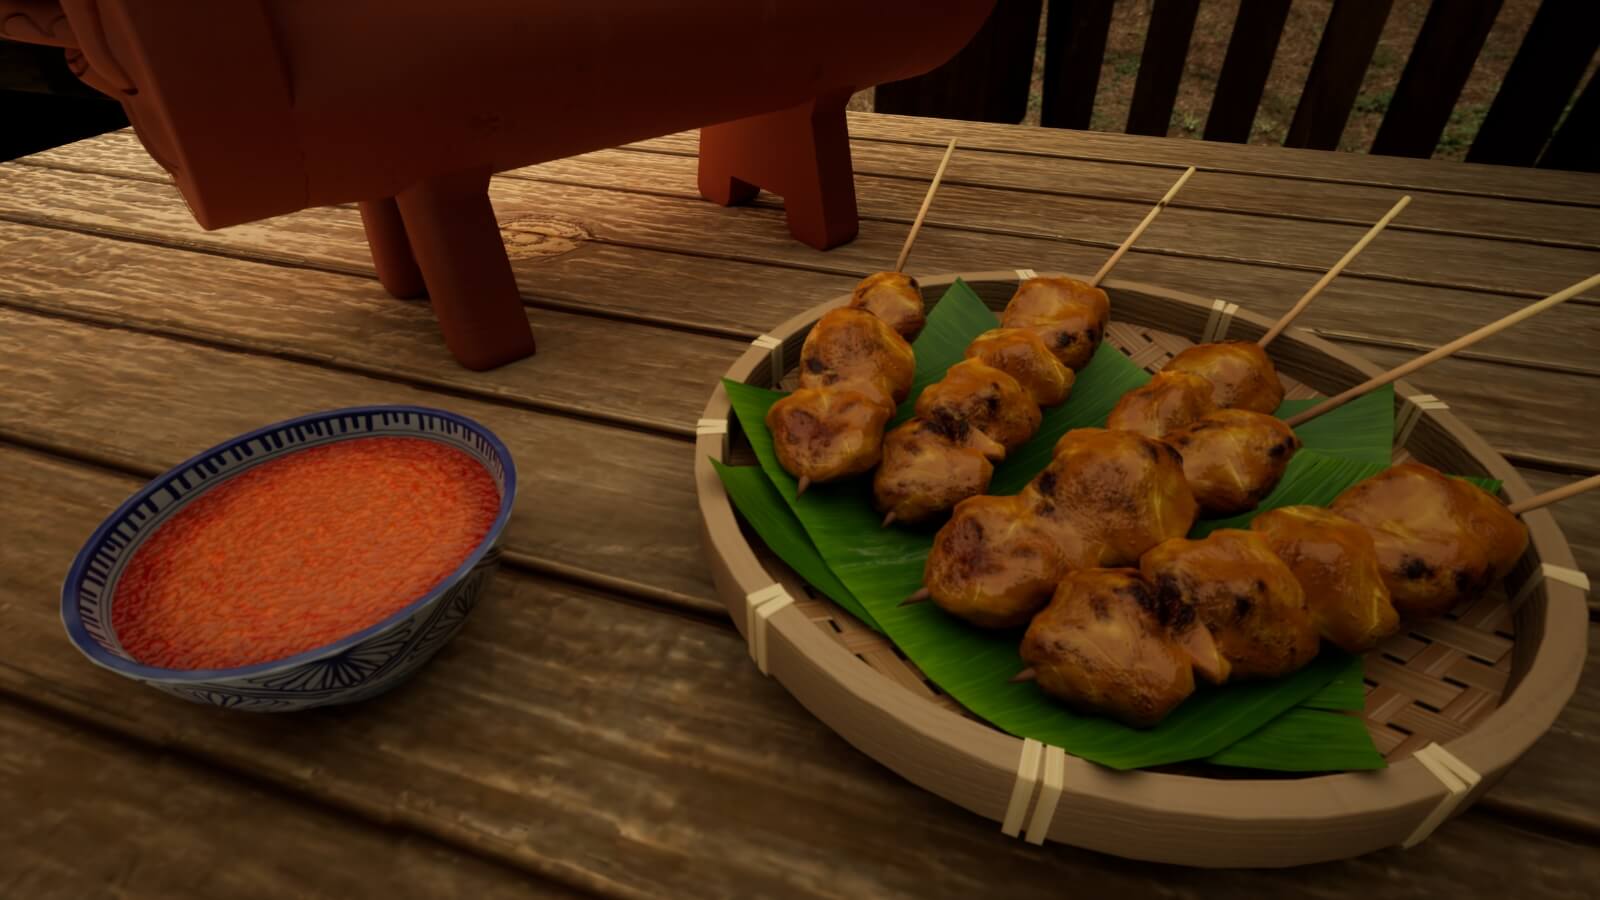 A close up of satay and a cup of sauce.